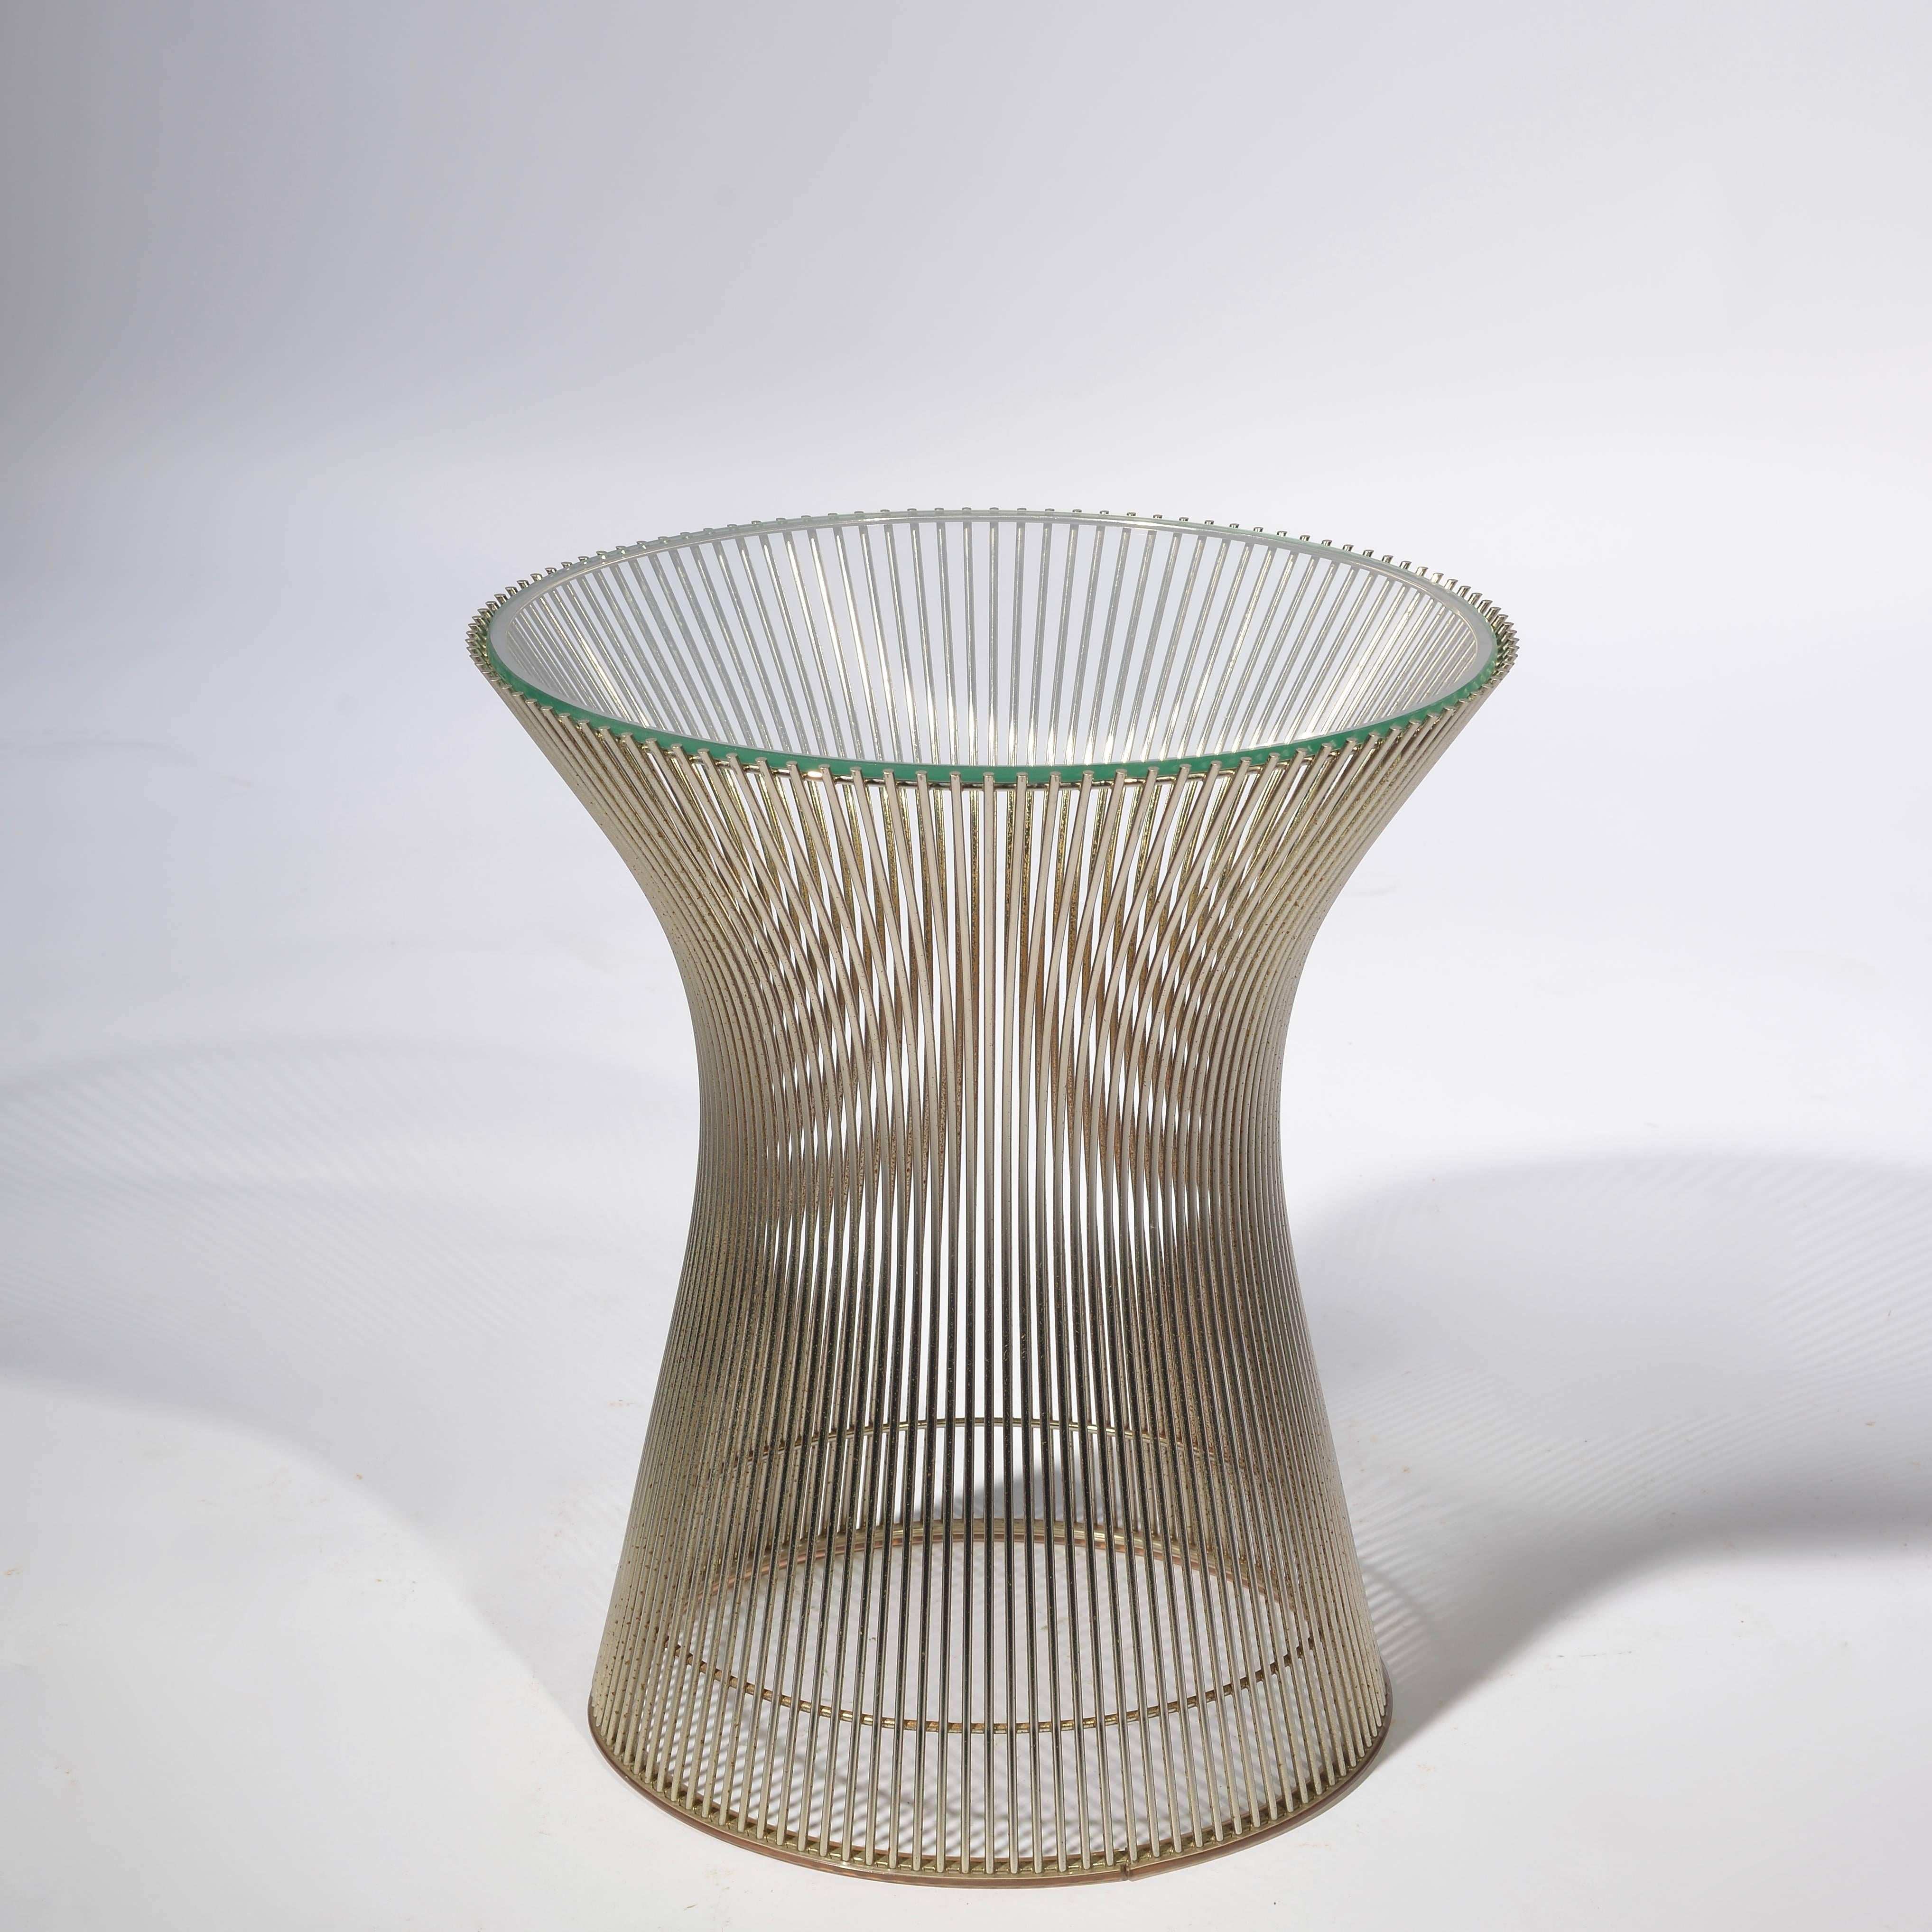 Iconic side table by Warren Platner for Knoll.
   